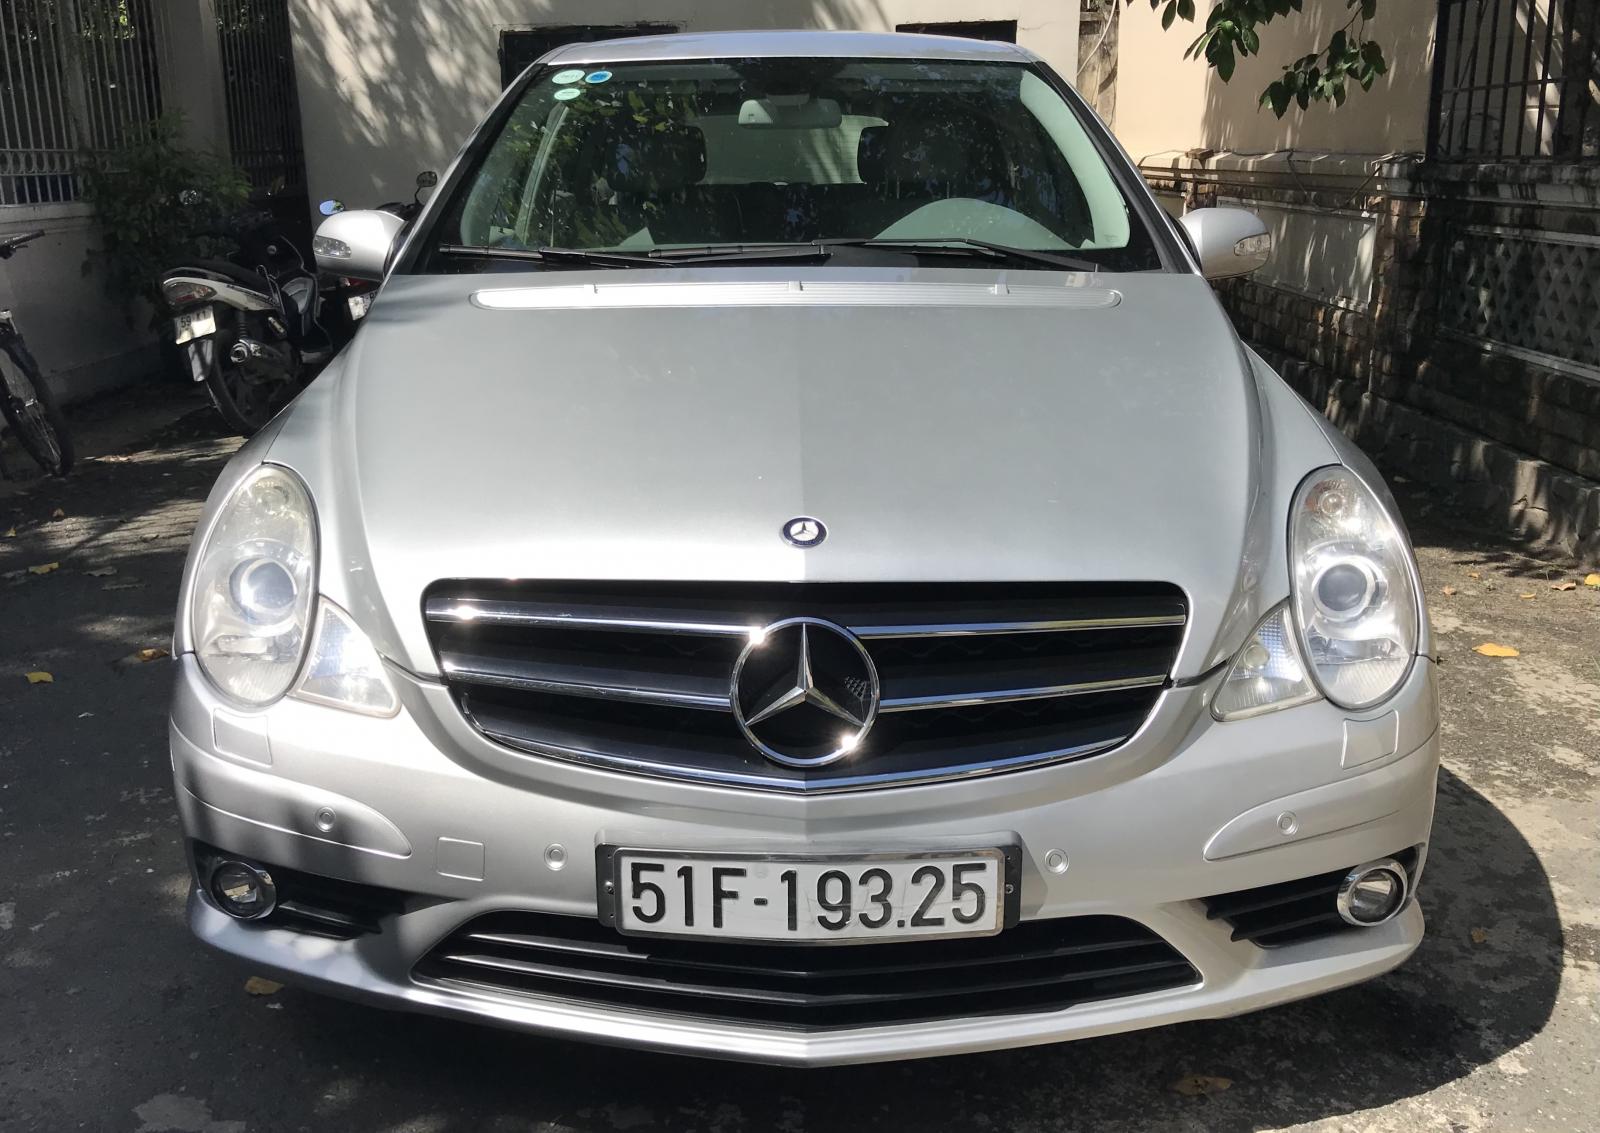 Mercedes-Benz R class R350 2008 - Selling 2008 Mercedes R350 car, silver color, price 400 million VND